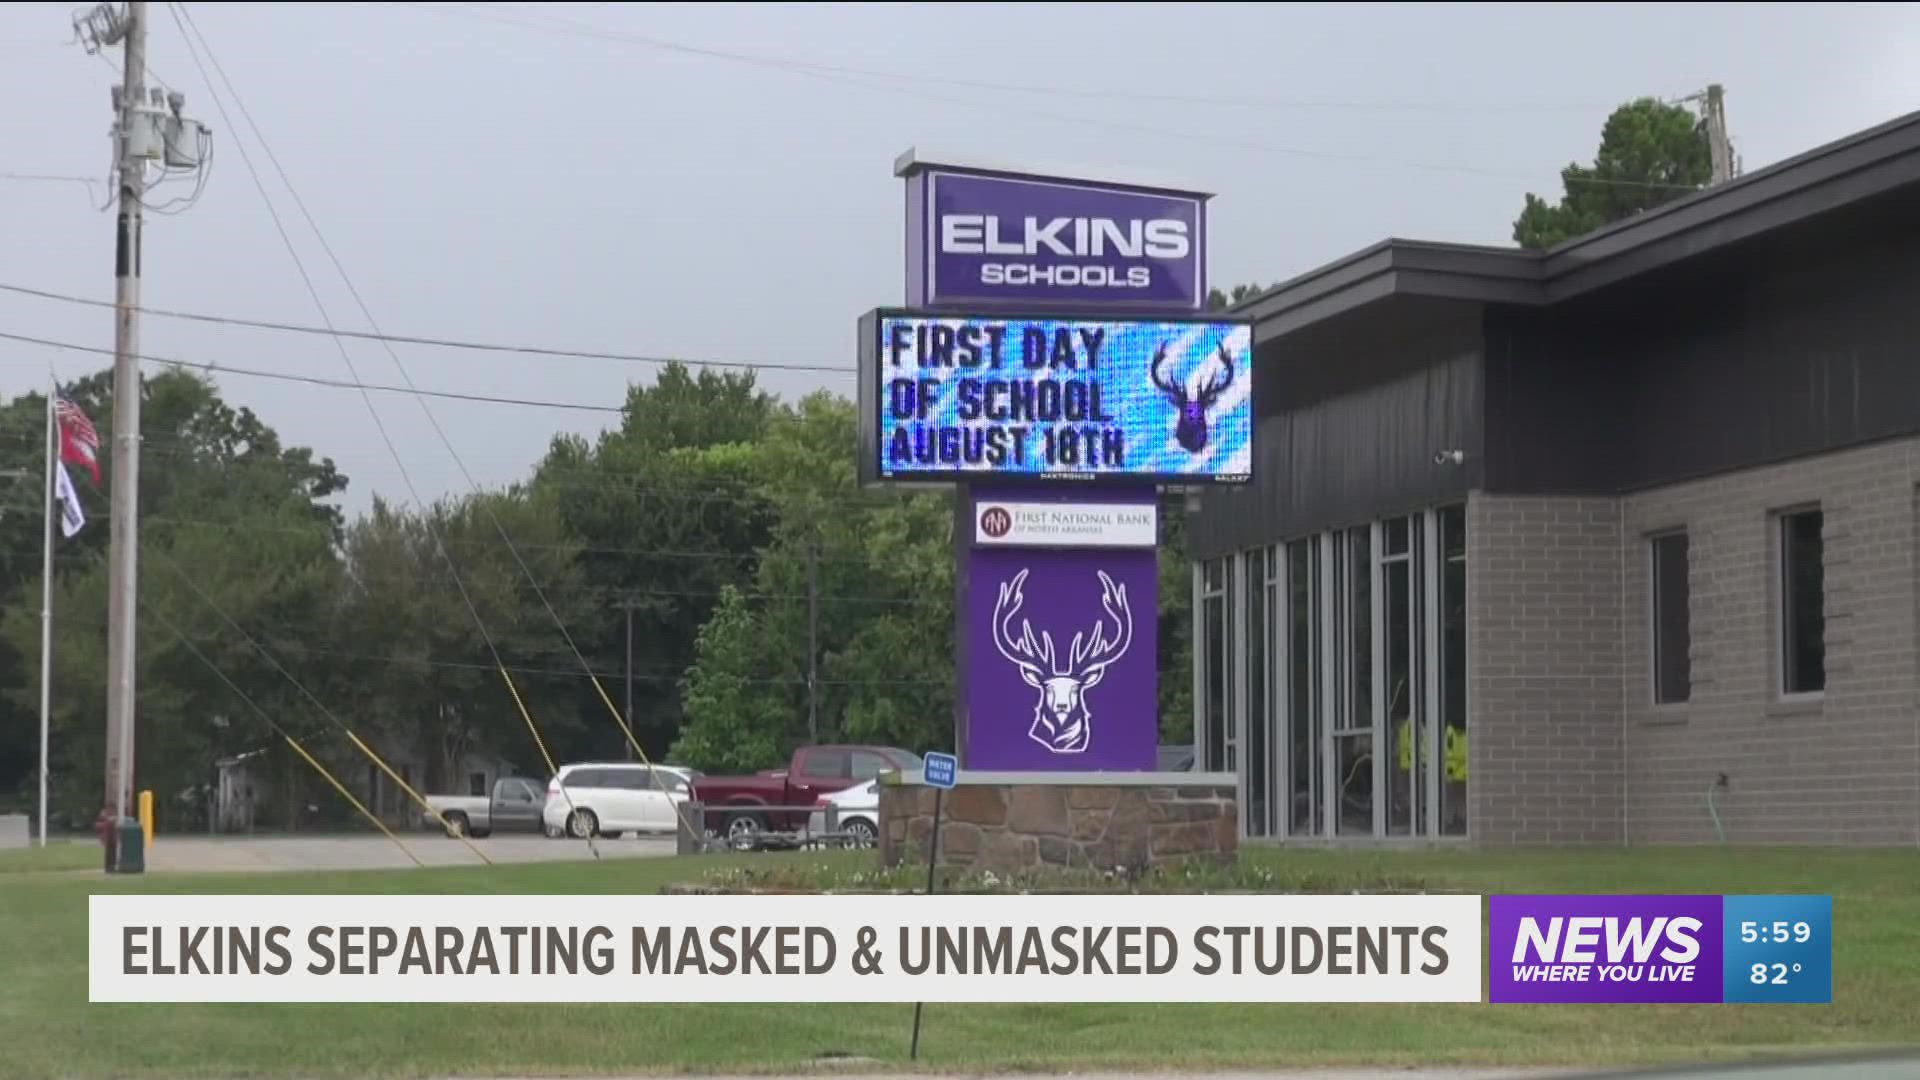 Elkins' superintendent sent a letter to parents detailing the mask separation guidelines within the district's classroom.